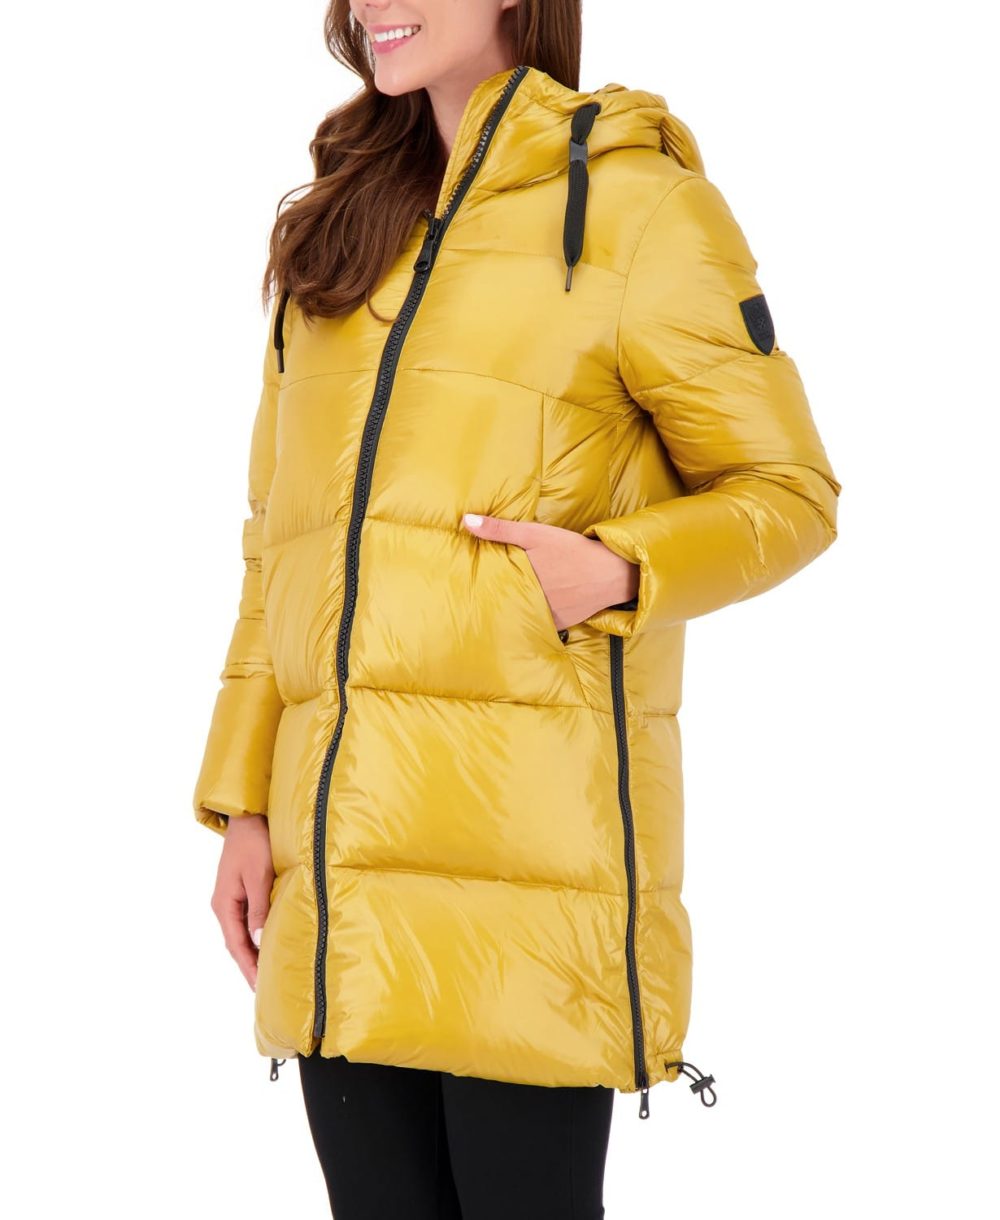 woocommerce-673321-2209615.cloudwaysapps.com-vince-camuto-womens-mustard-high-shine-hooded-puffer-coat